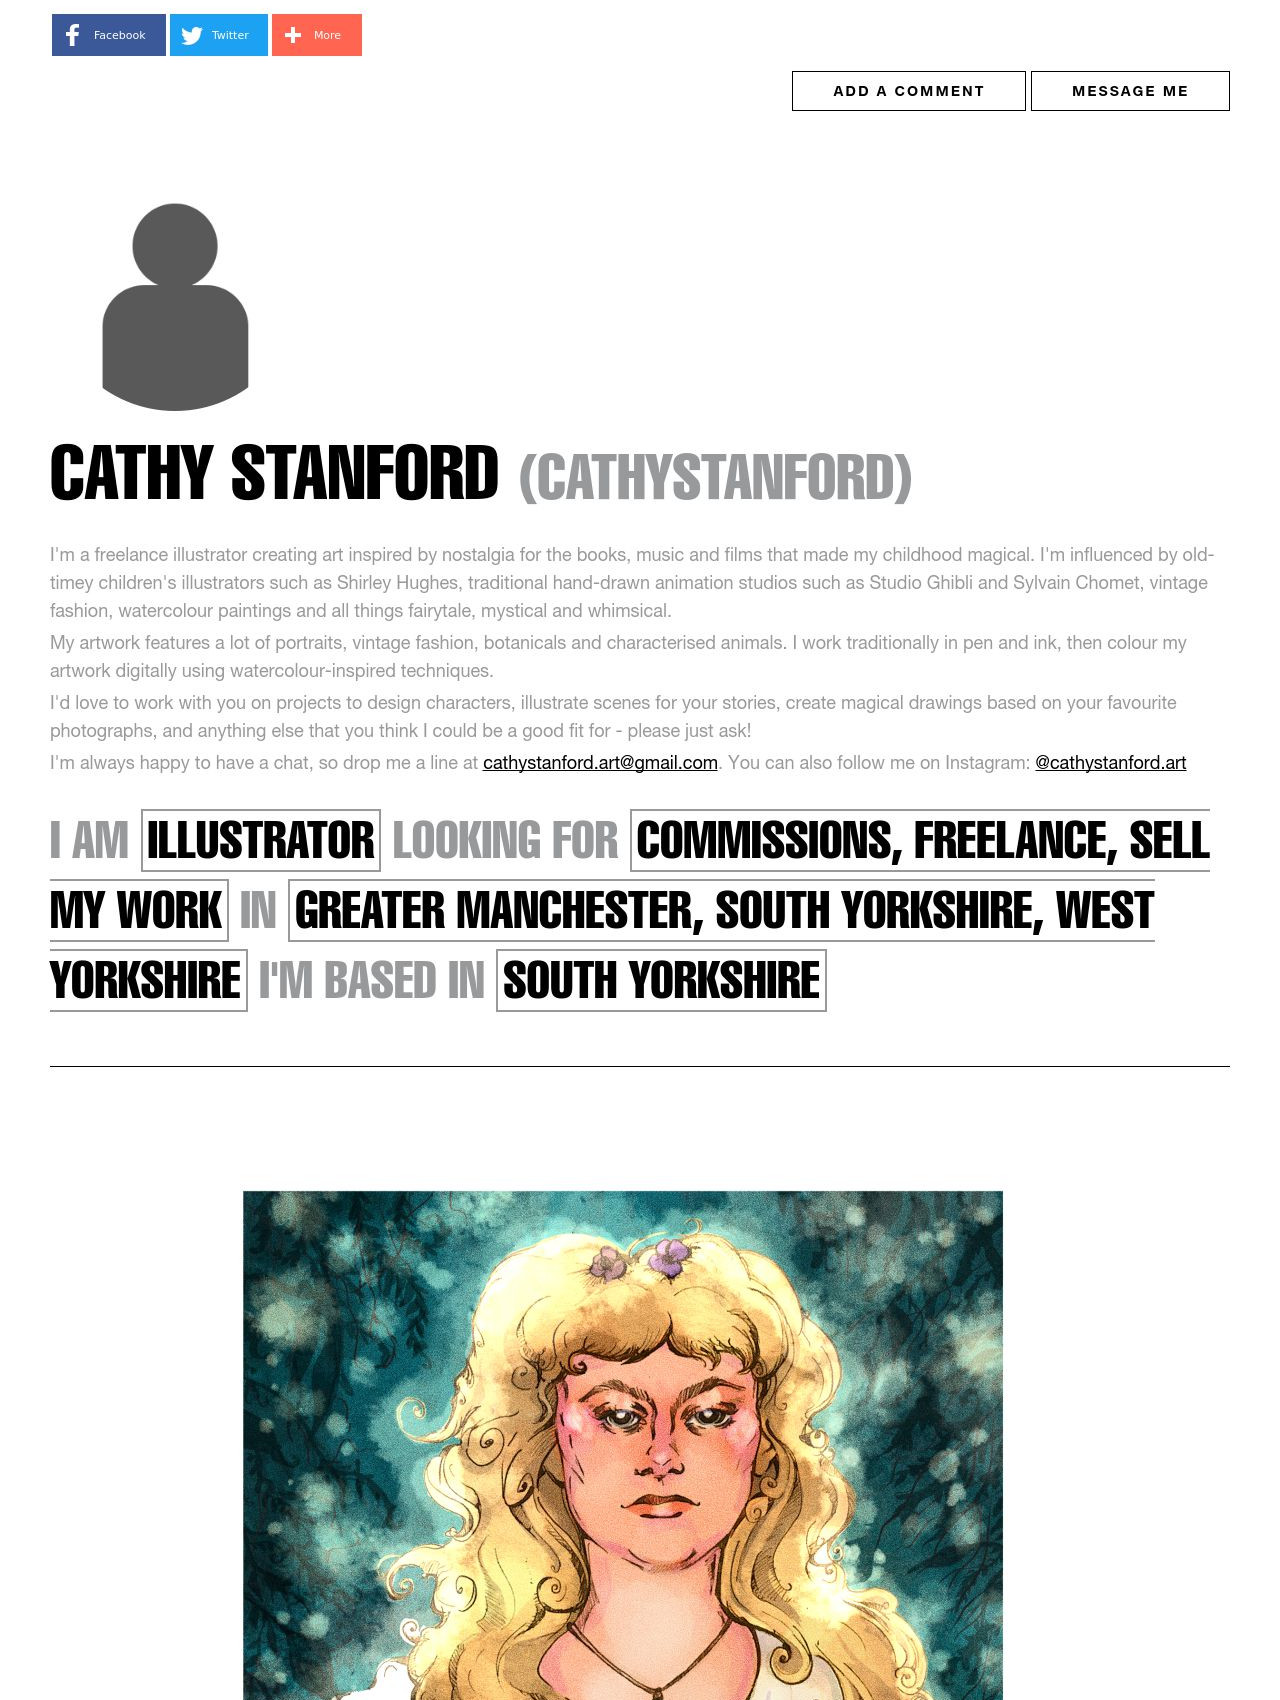 Cathy Stanford